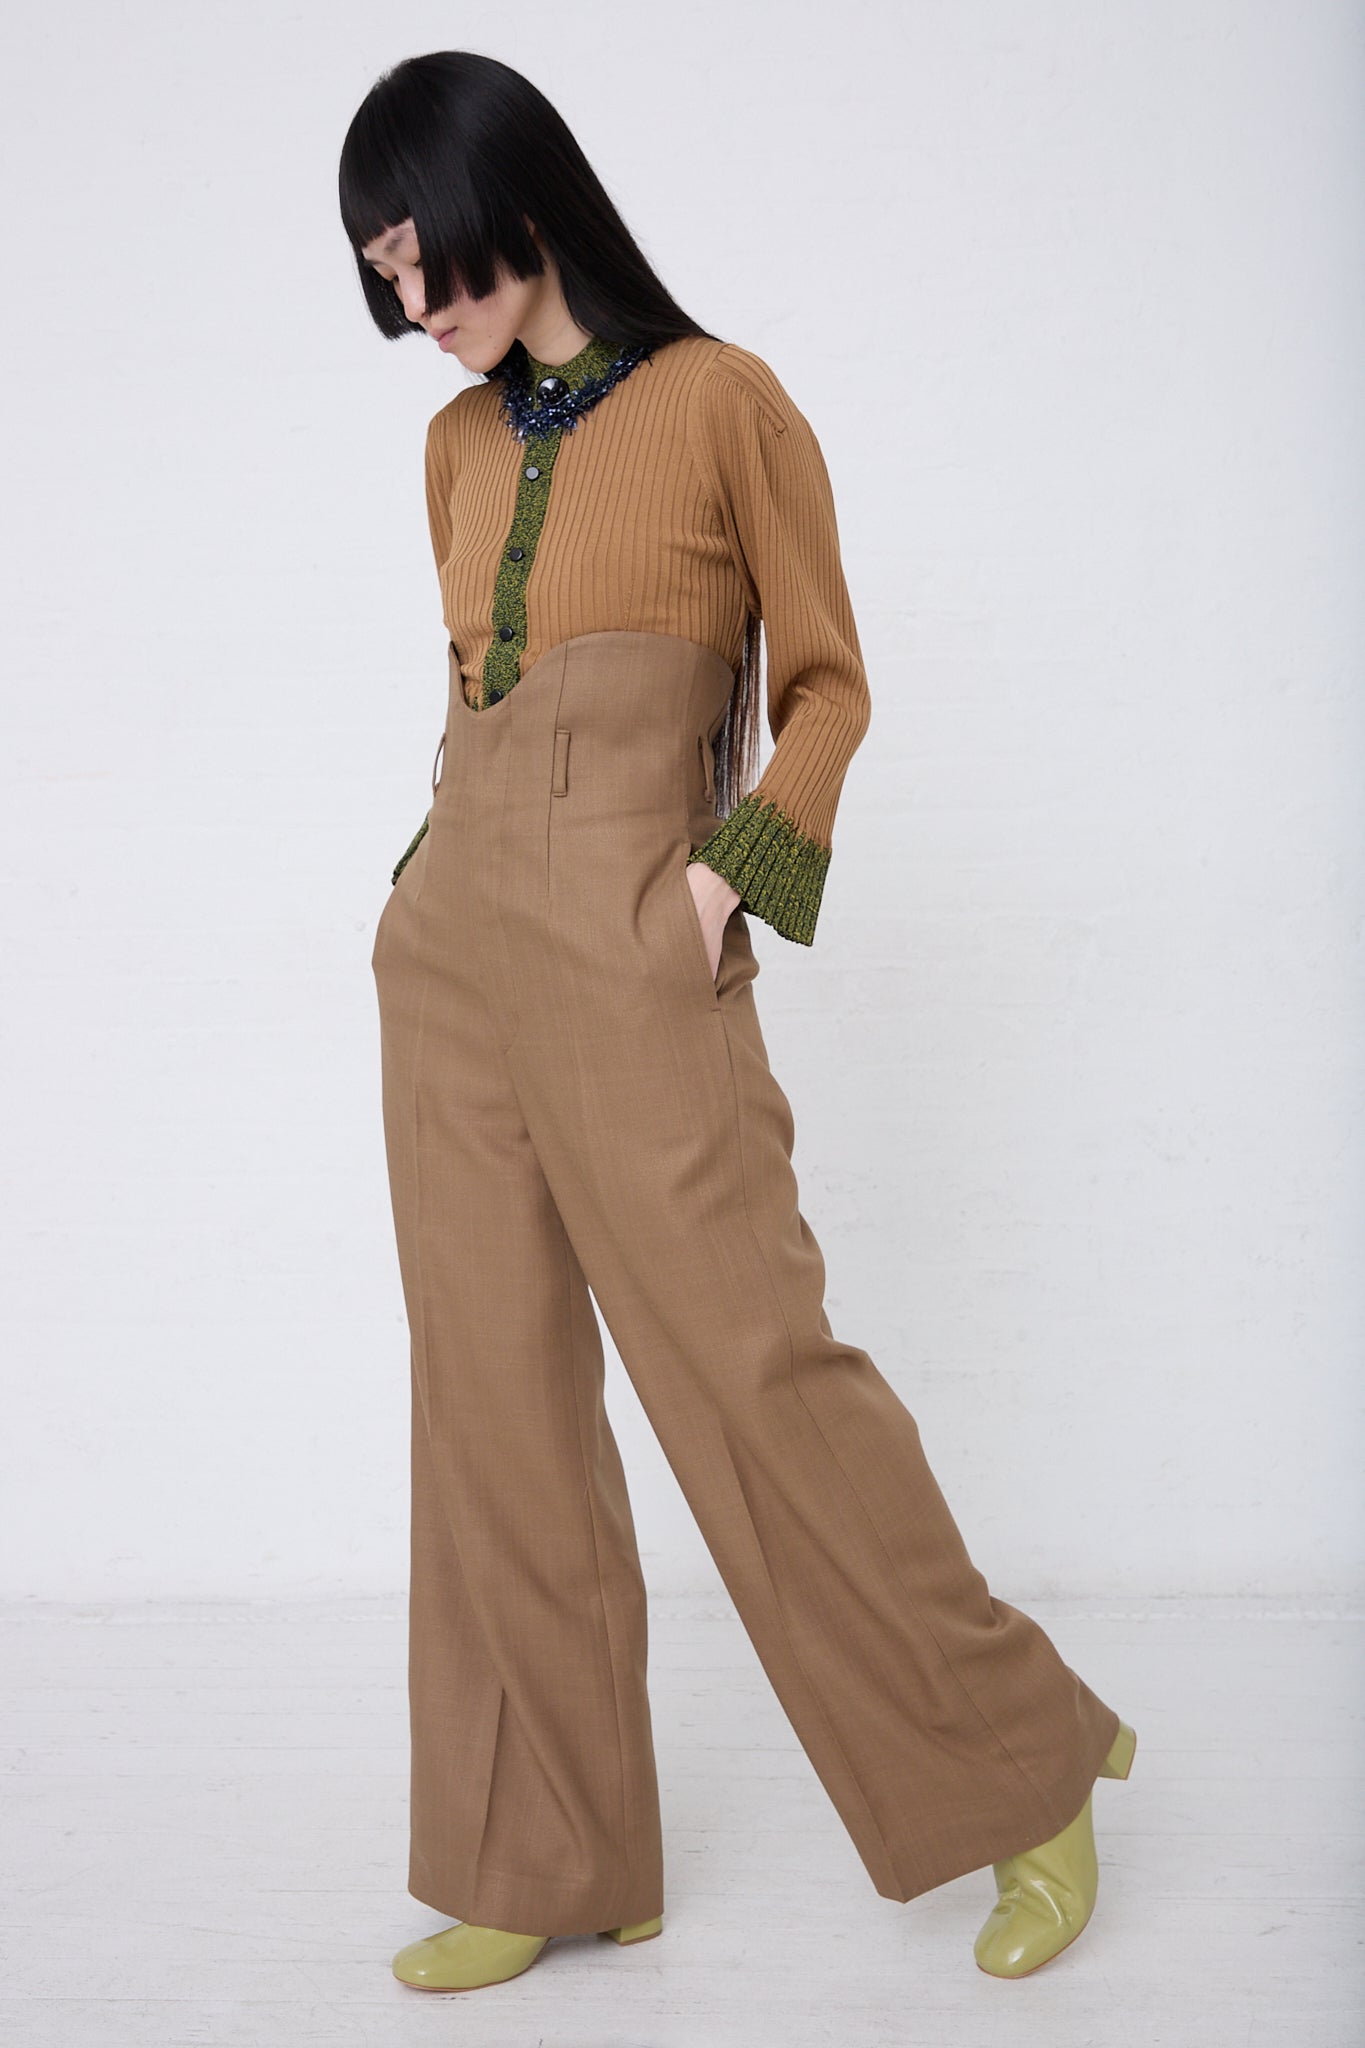 A woman is standing in a room wearing a TOGA PULLA trouser in brown, with a high curved waist.